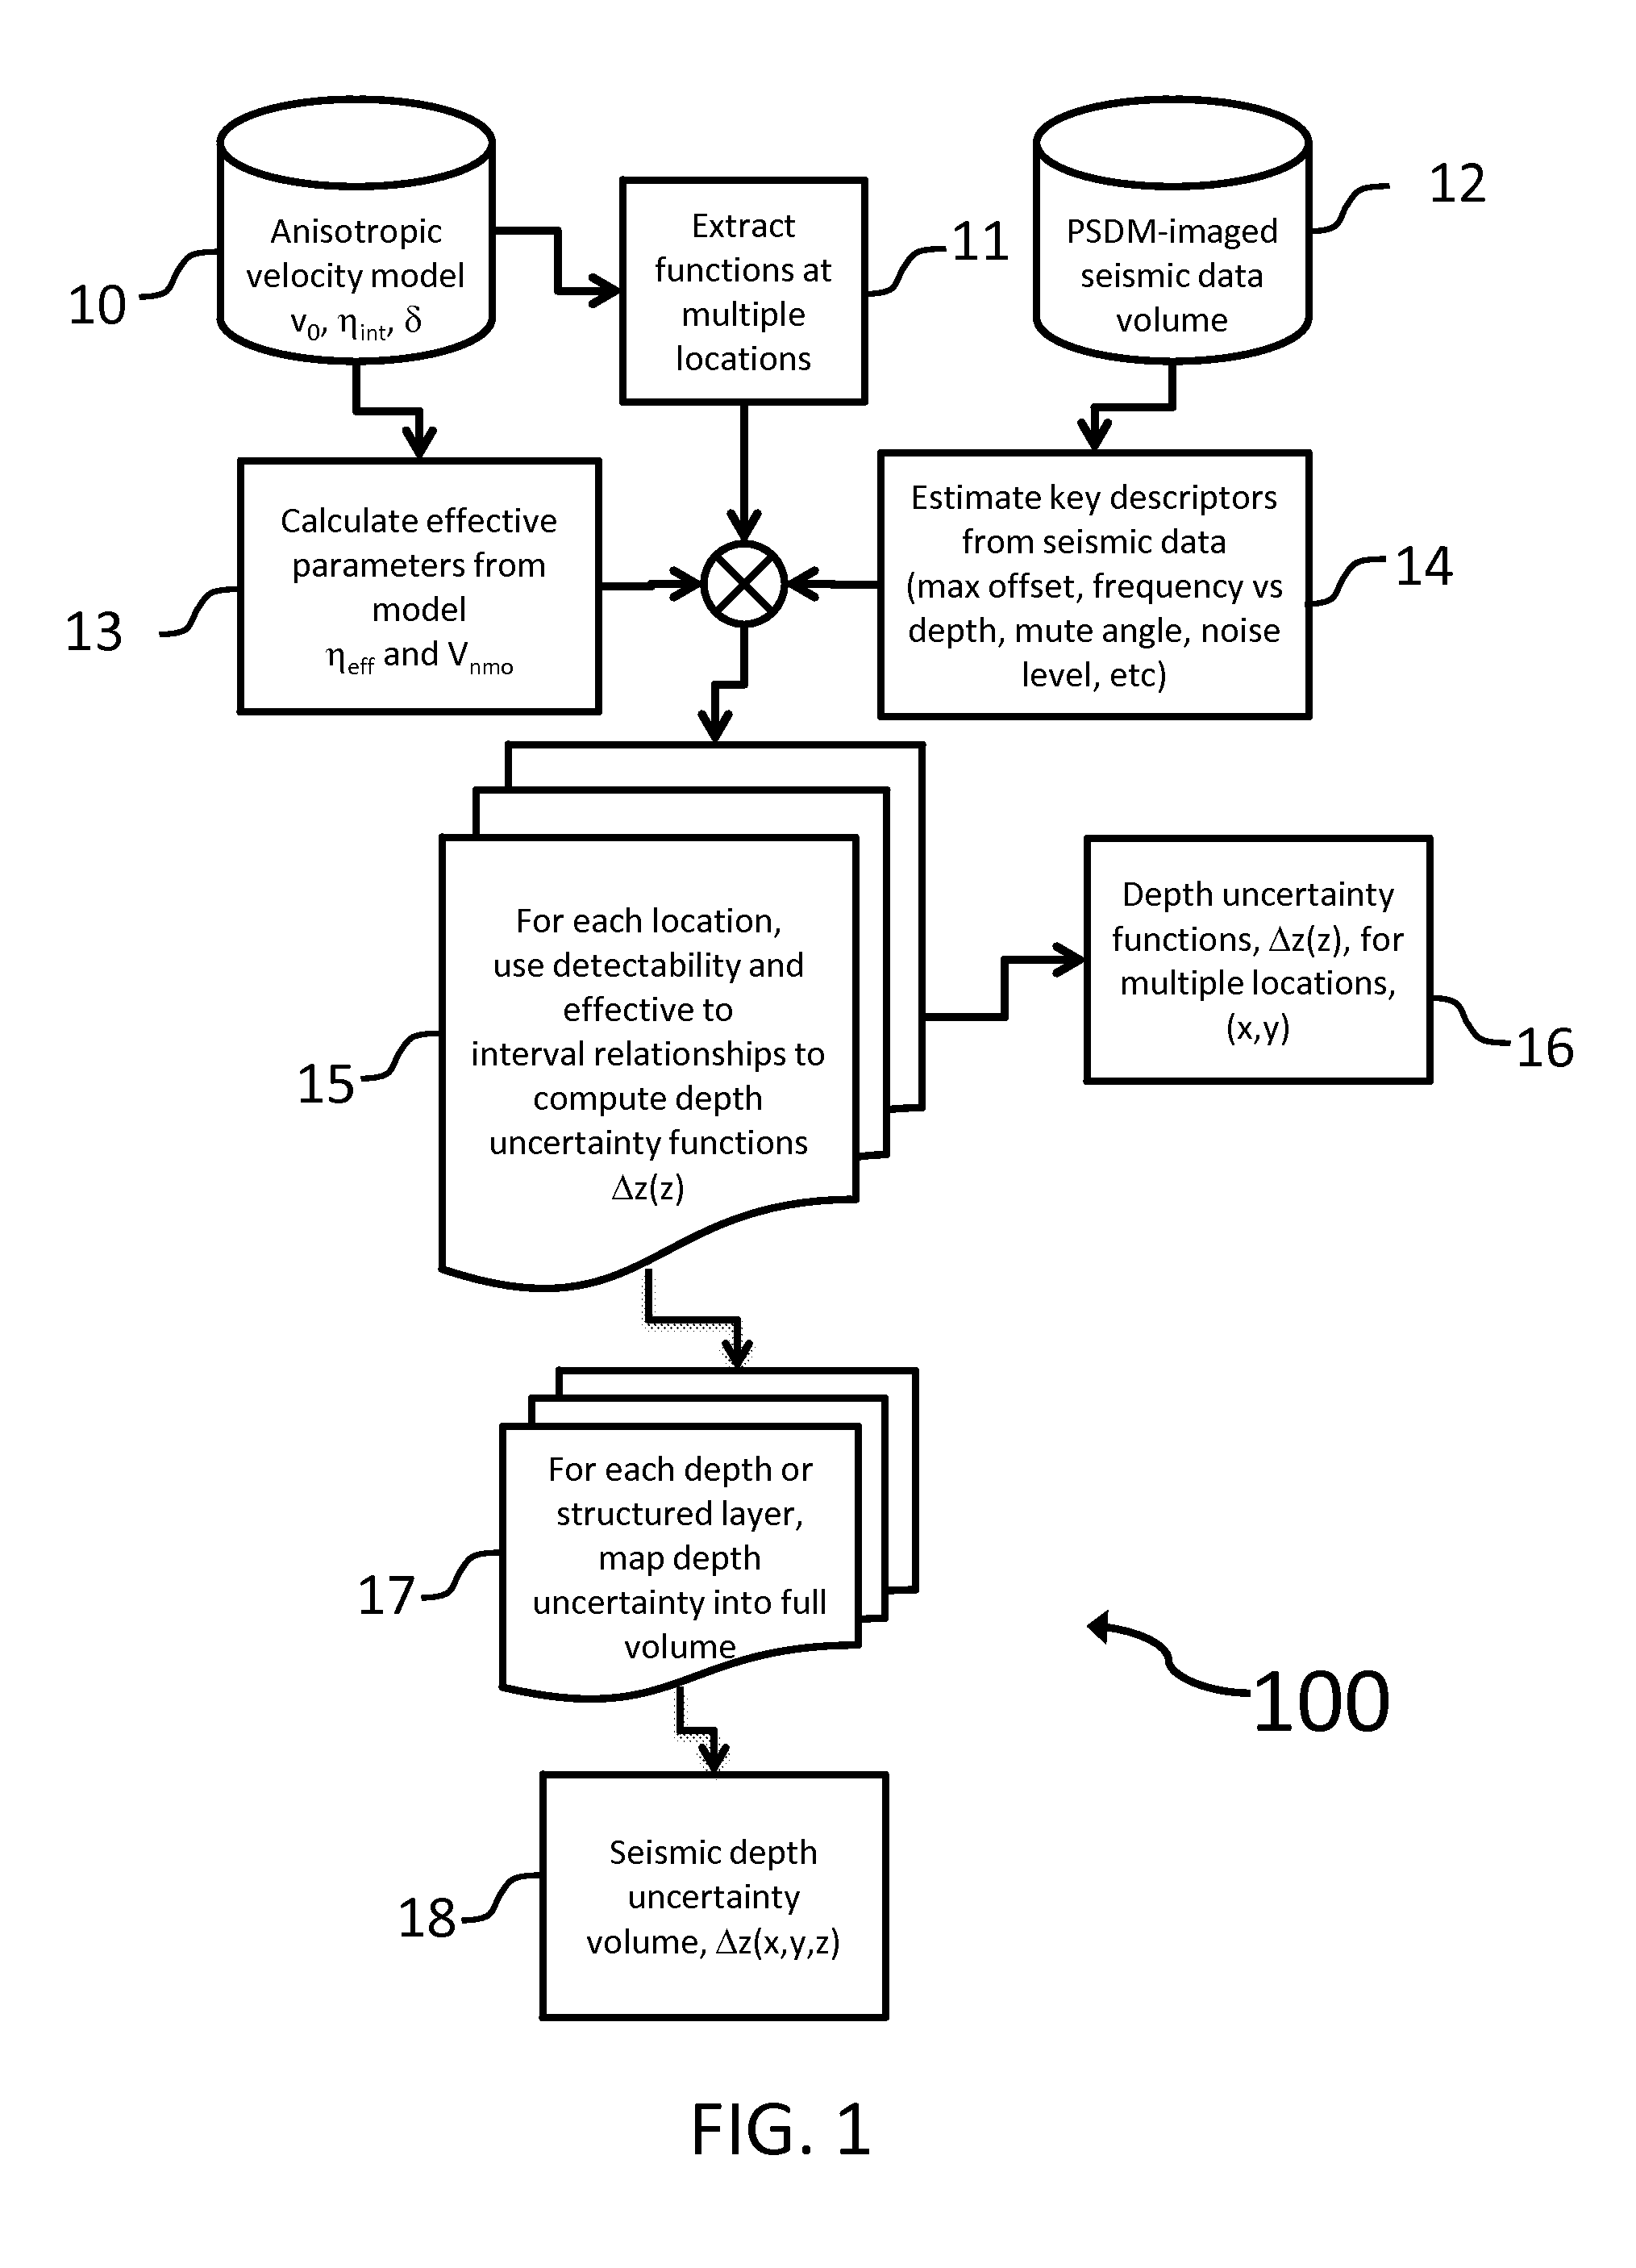 System and method for subsurface characterization including uncertainty estimation